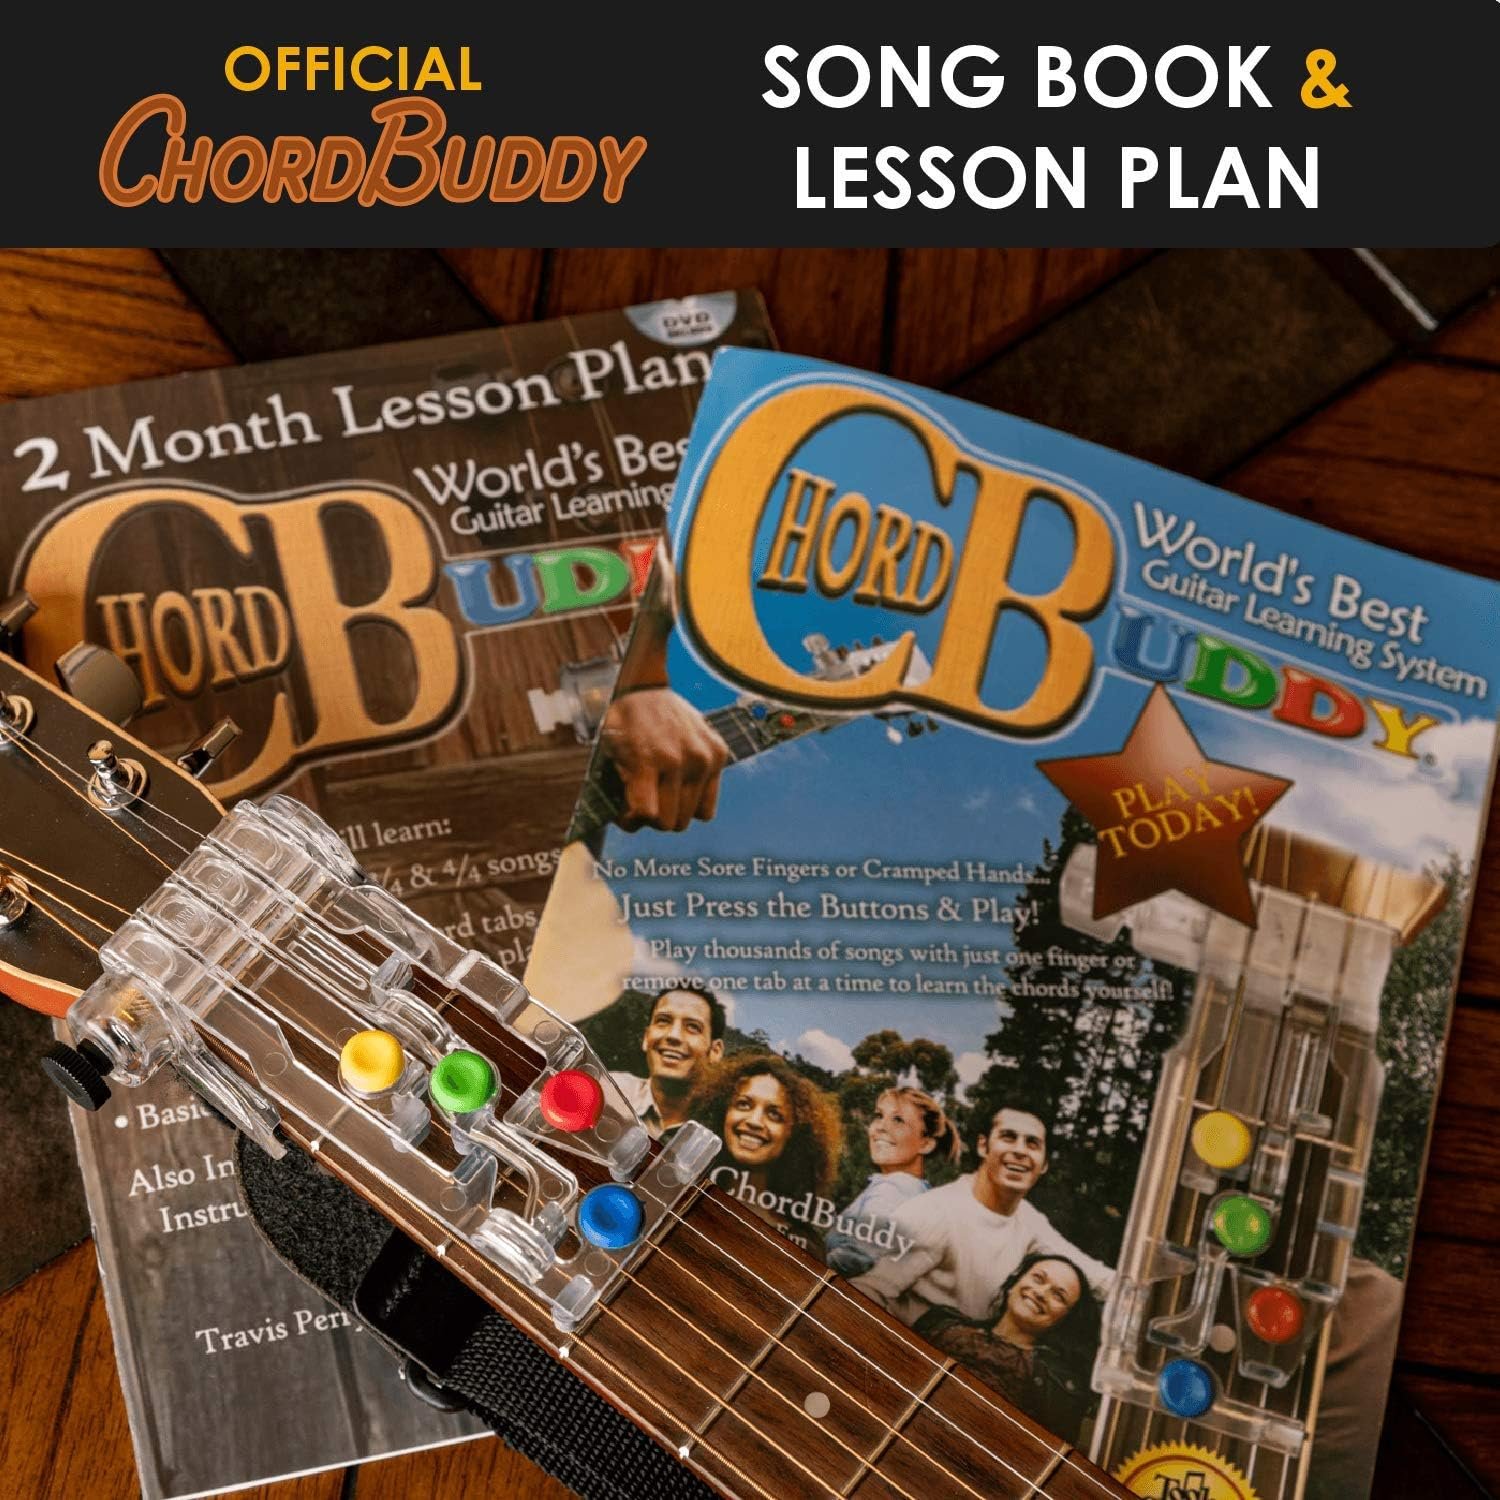 ChordBuddy “MADE IN THE USA” - Guitar Learning with Songbook, Lesson Plan, App, Right Handed ChordBuddy, and Tuner- for Acoustic Guitars only